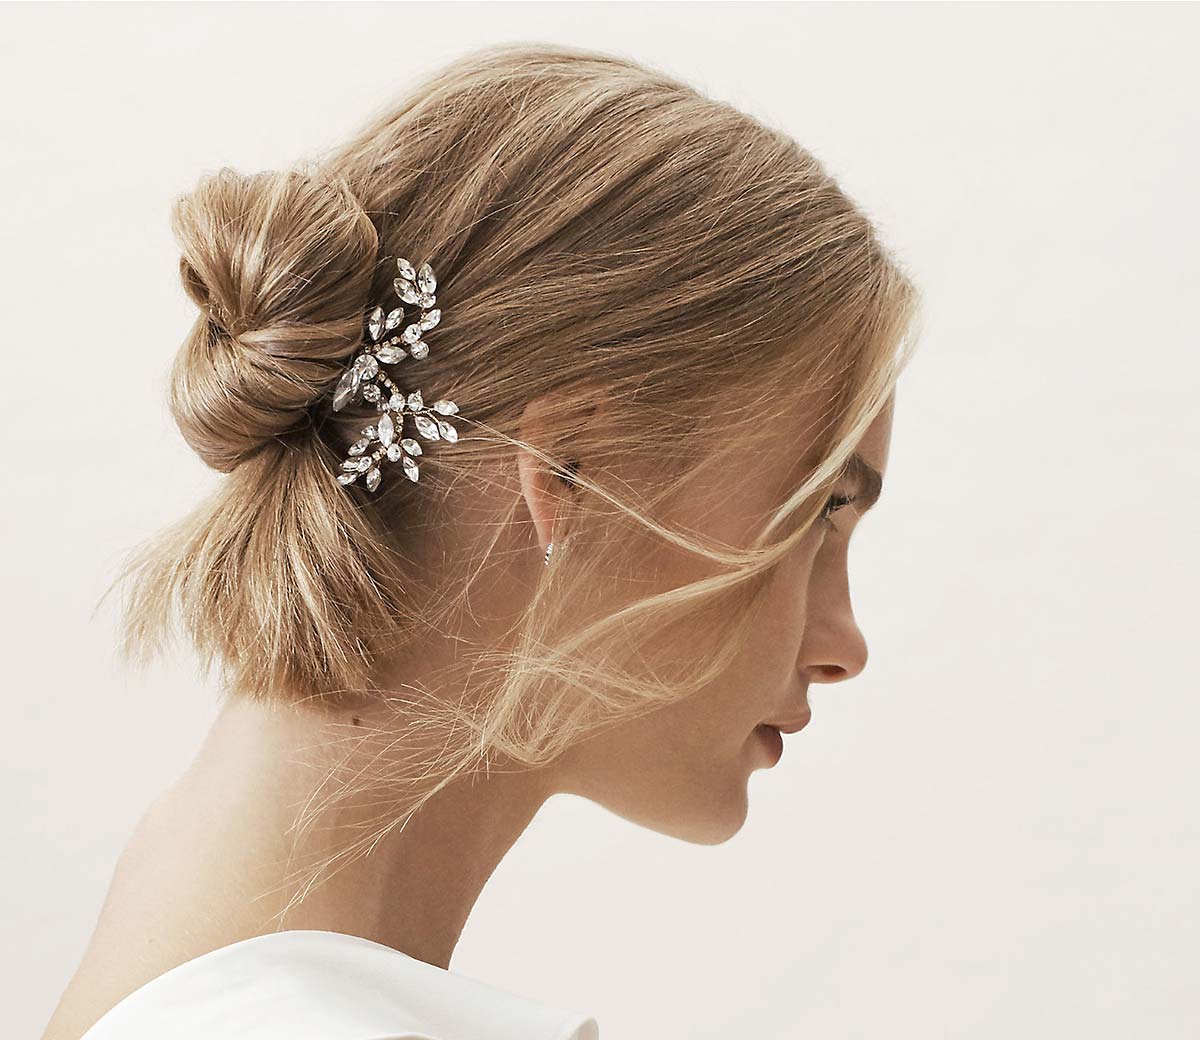 Stunning Decorative Bobby Pins Pretty Hair Accessories Youll Want To Buy Now • Ohmeohmy Blog